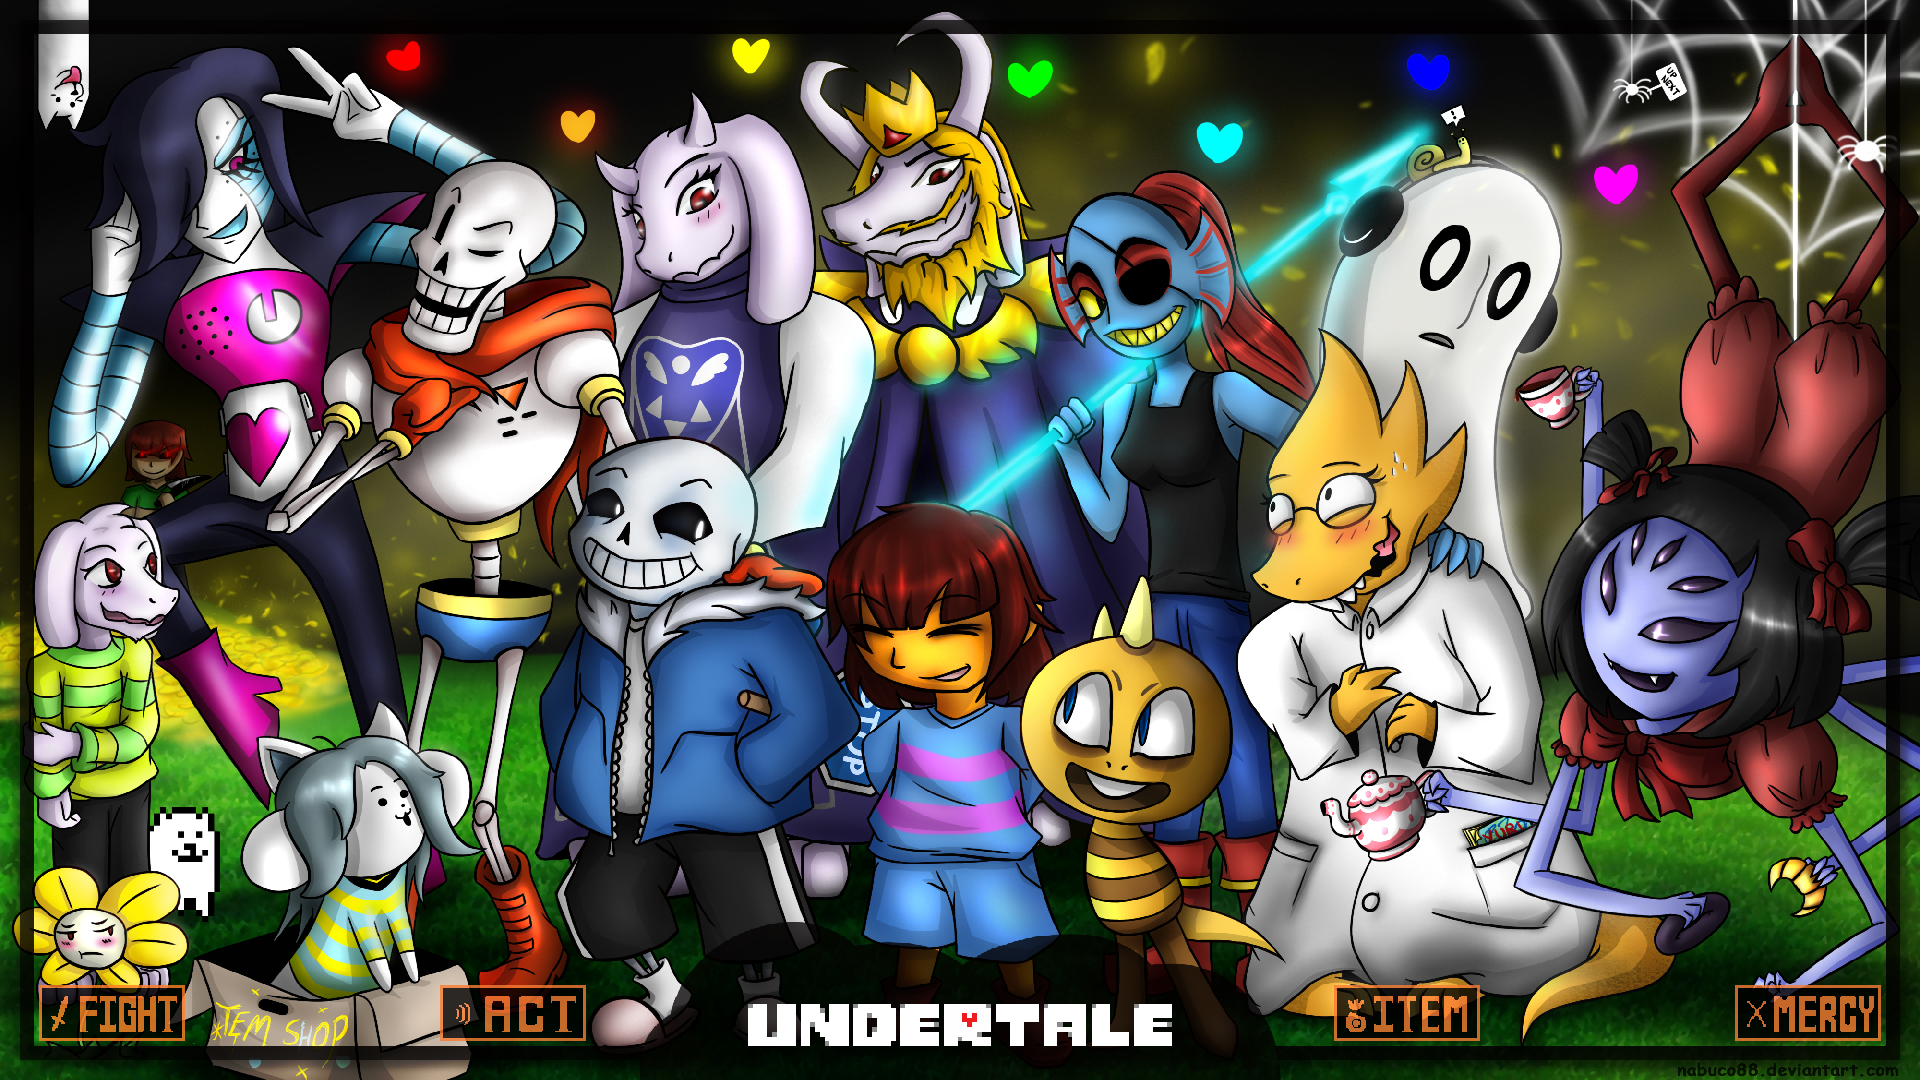 Free Download Undertale Wallpaper By Nabuco88 On 1920x1080 For Your